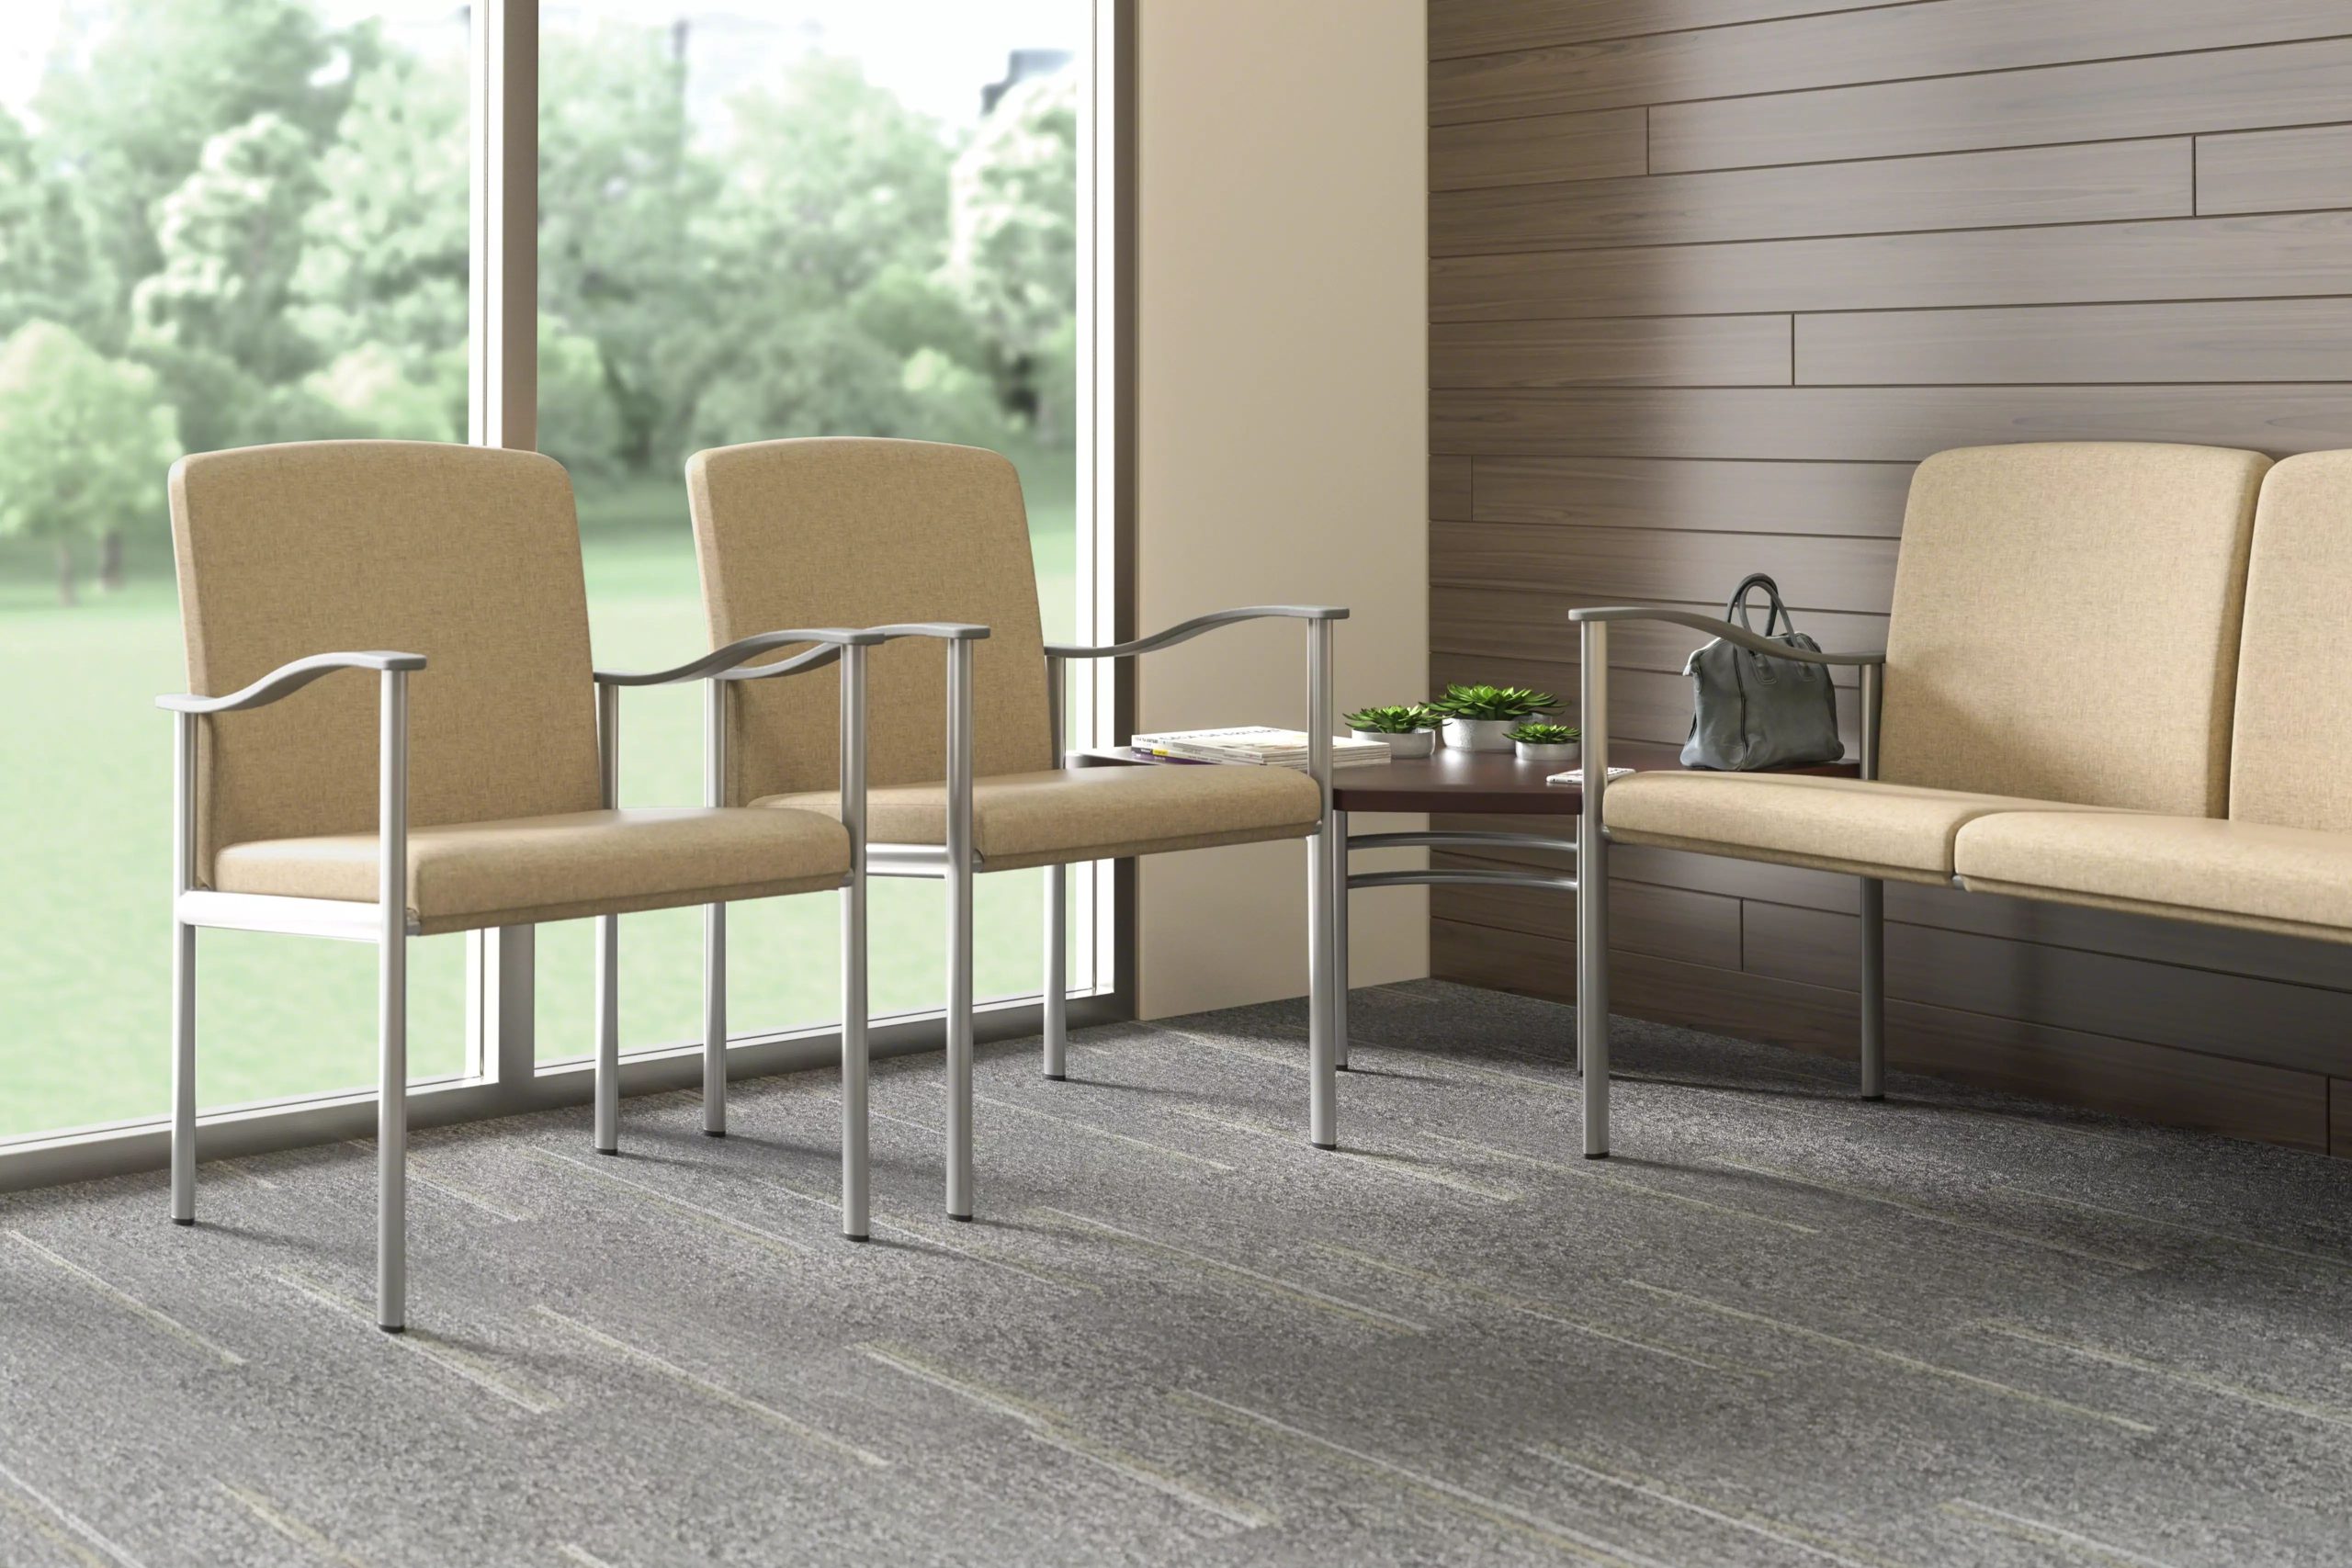 Aspekt Medical Waiting Room & Reception Chairs with Arms | Steelcase